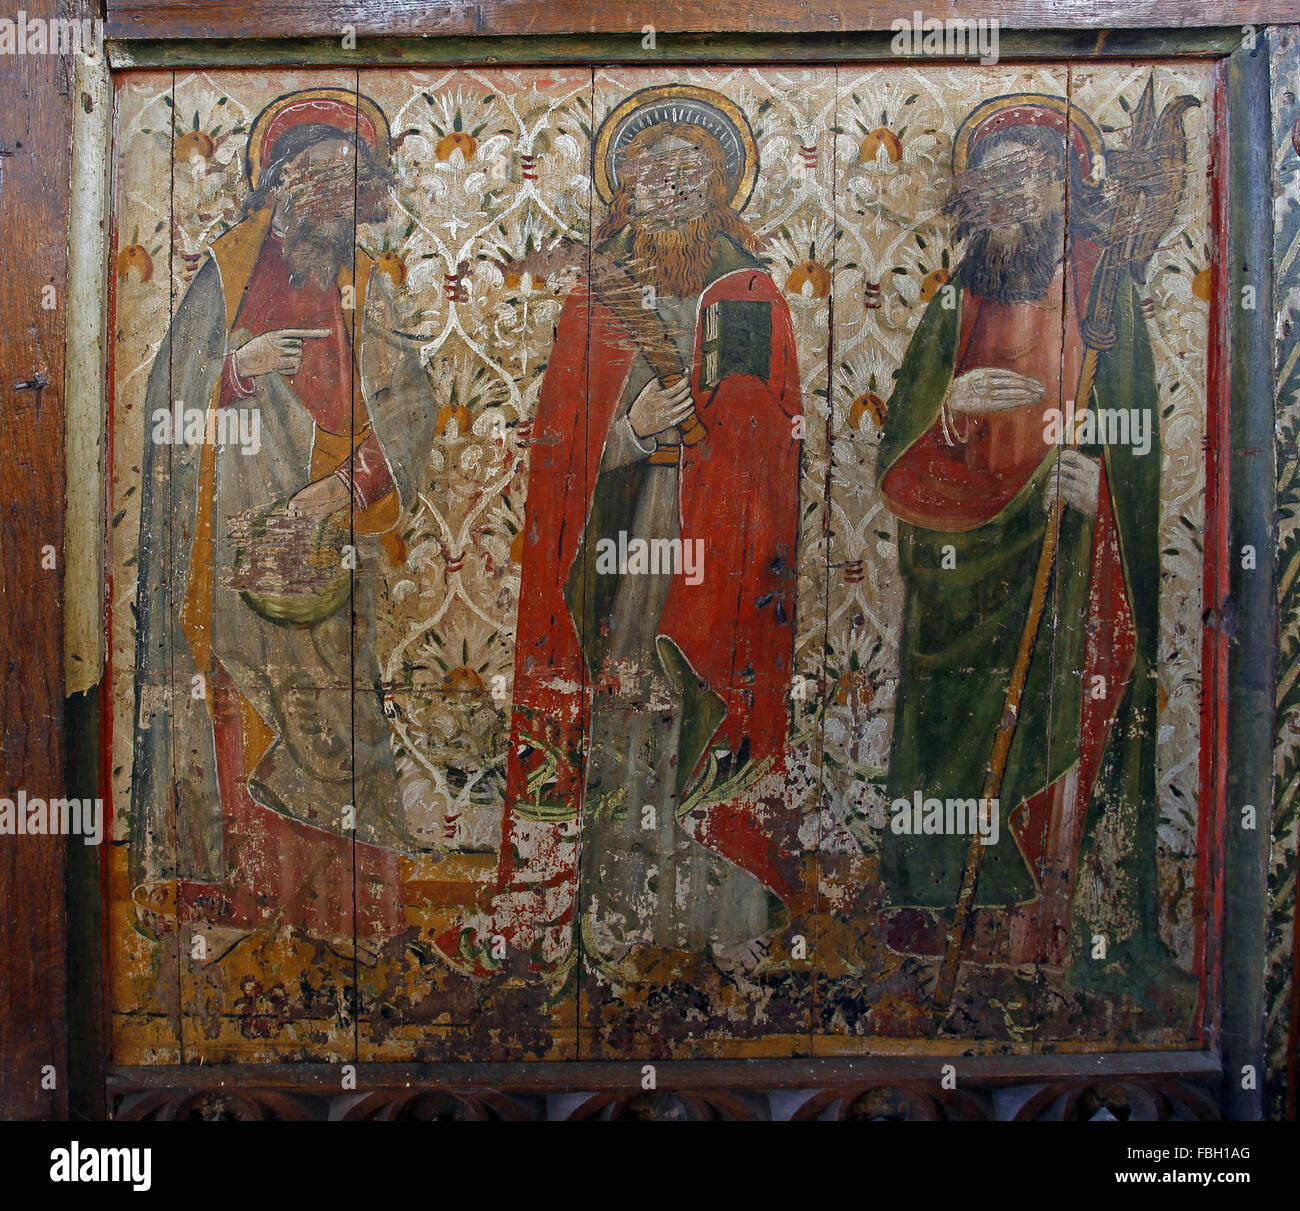 Painted Apostles on the Rood Screen, Saints Phillip, Bartholomew and one other, Much defaced; St Michael's Church, Irstead, Norf Stock Photo